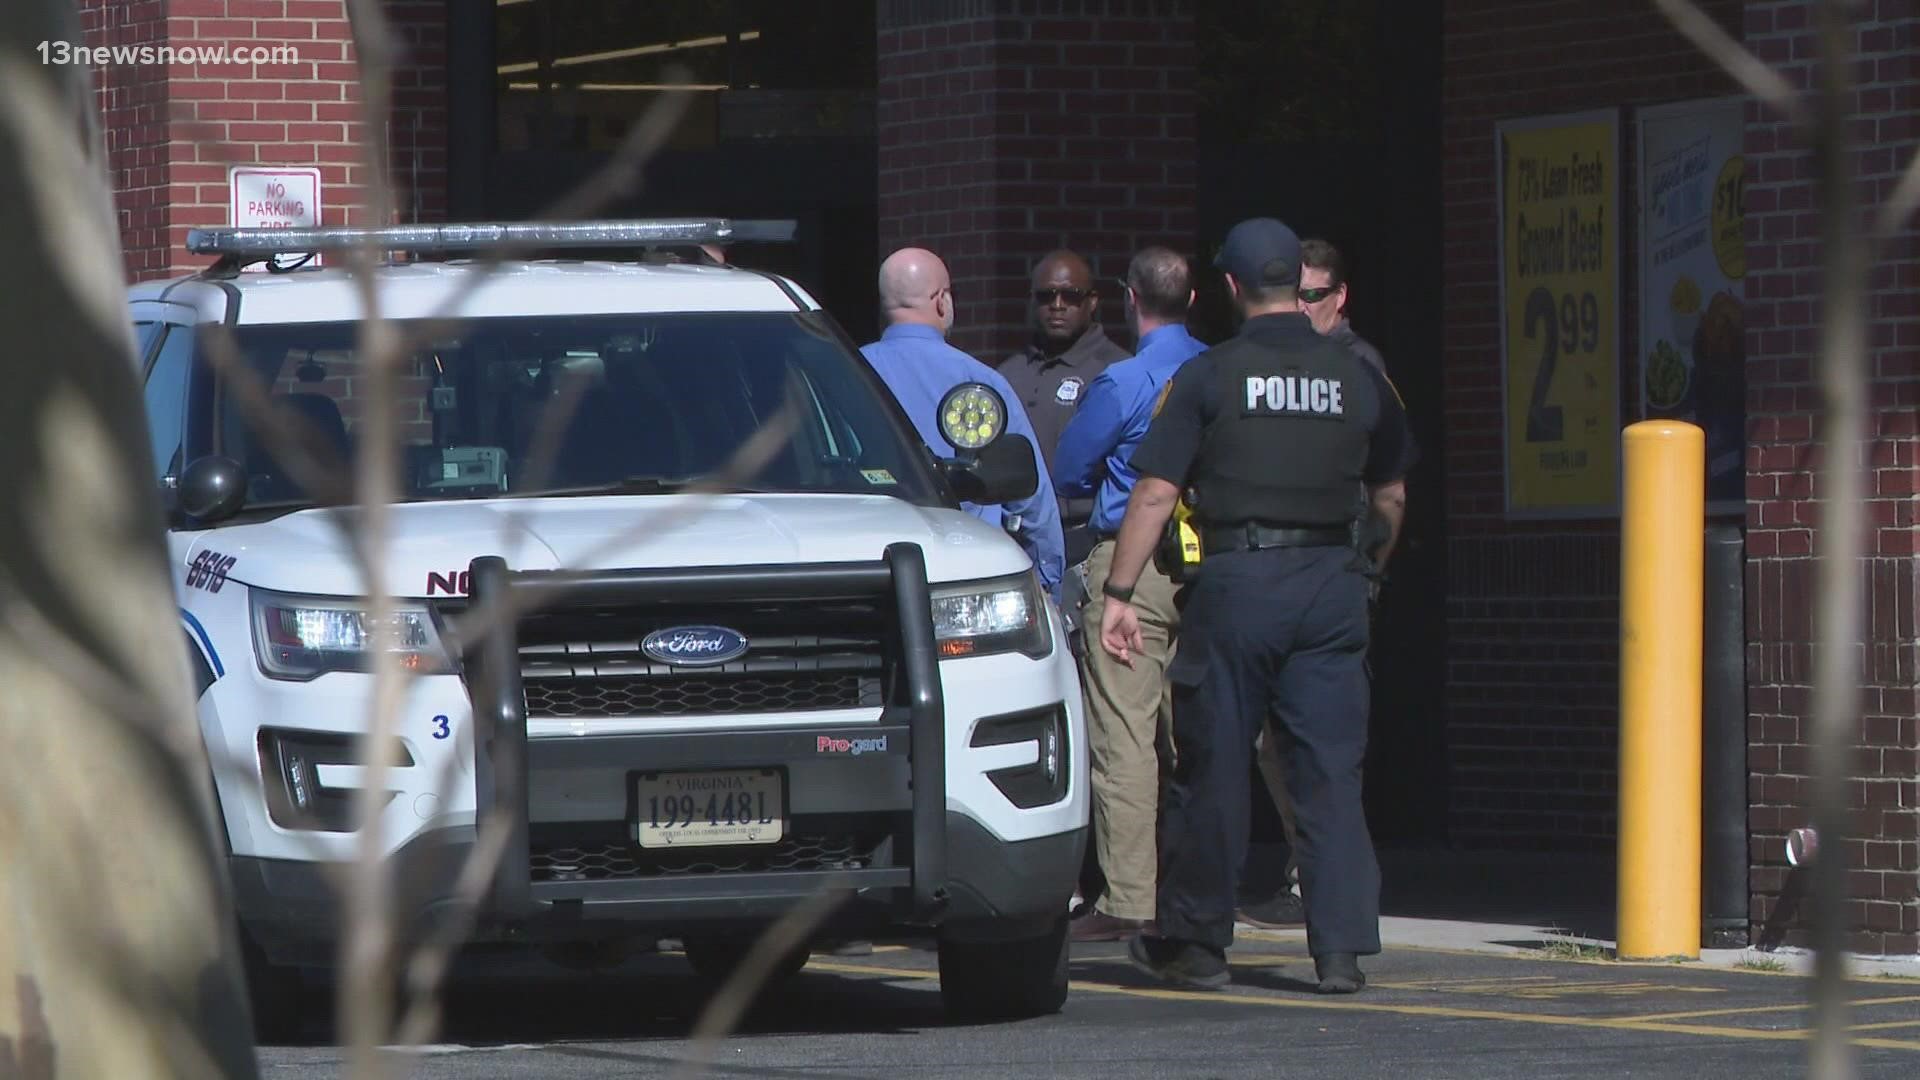 Norfolk police said a woman was shot in a Food Lion parking lot, located at 3530 Tidewater Drive after getting into an argument with someone Wednesday.